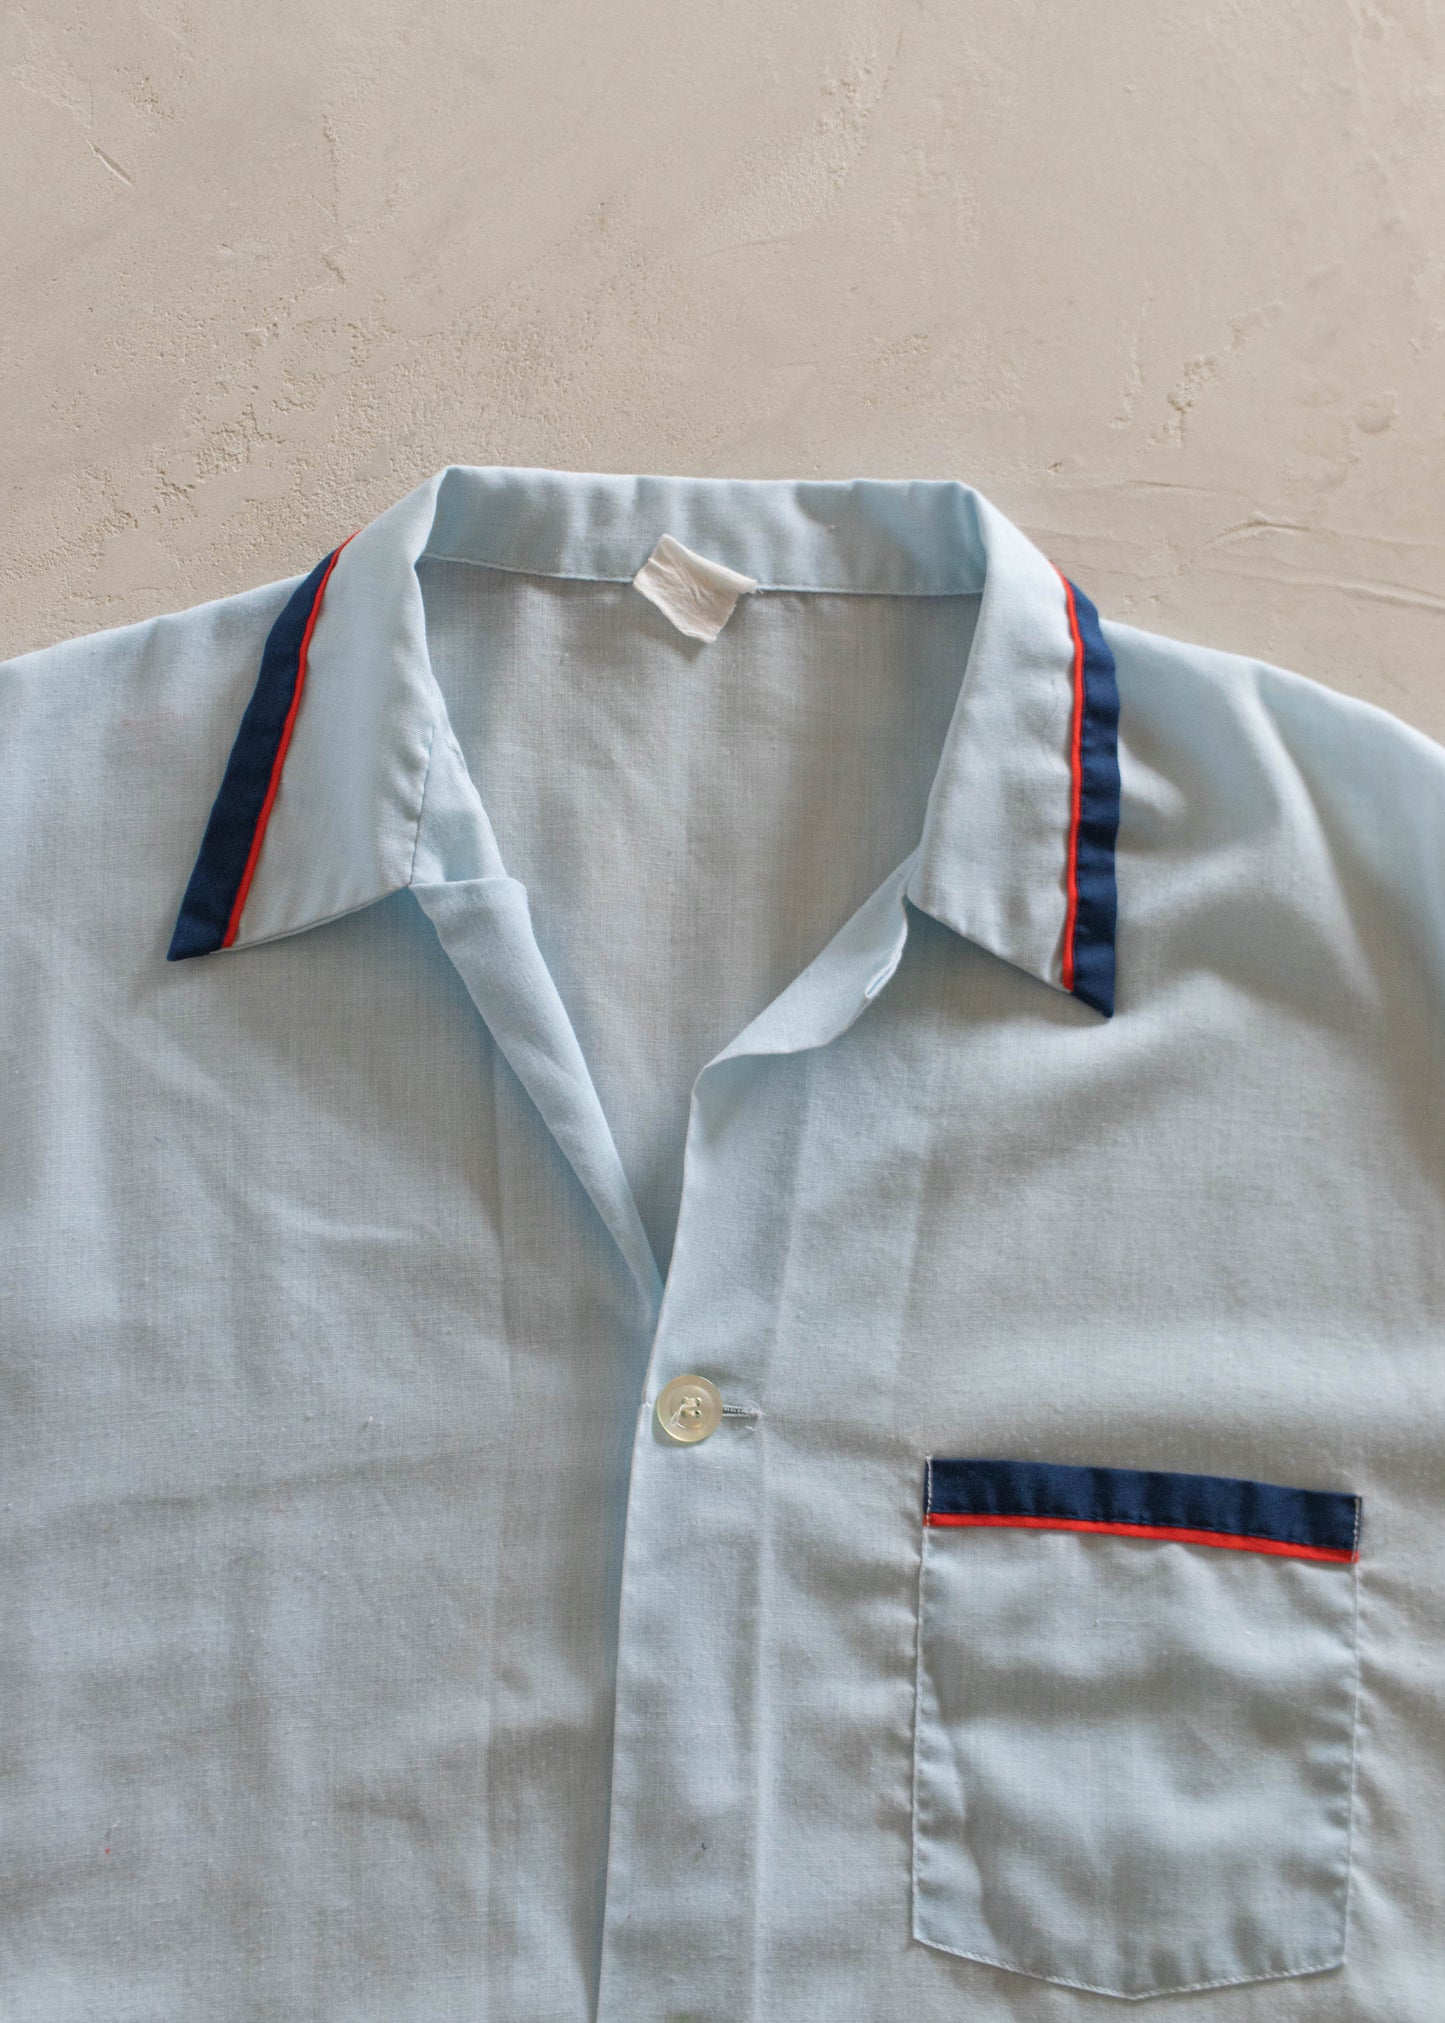 1970s Solid Blue Long Sleeve Button Up Pajama Shirt Size XL/2XL